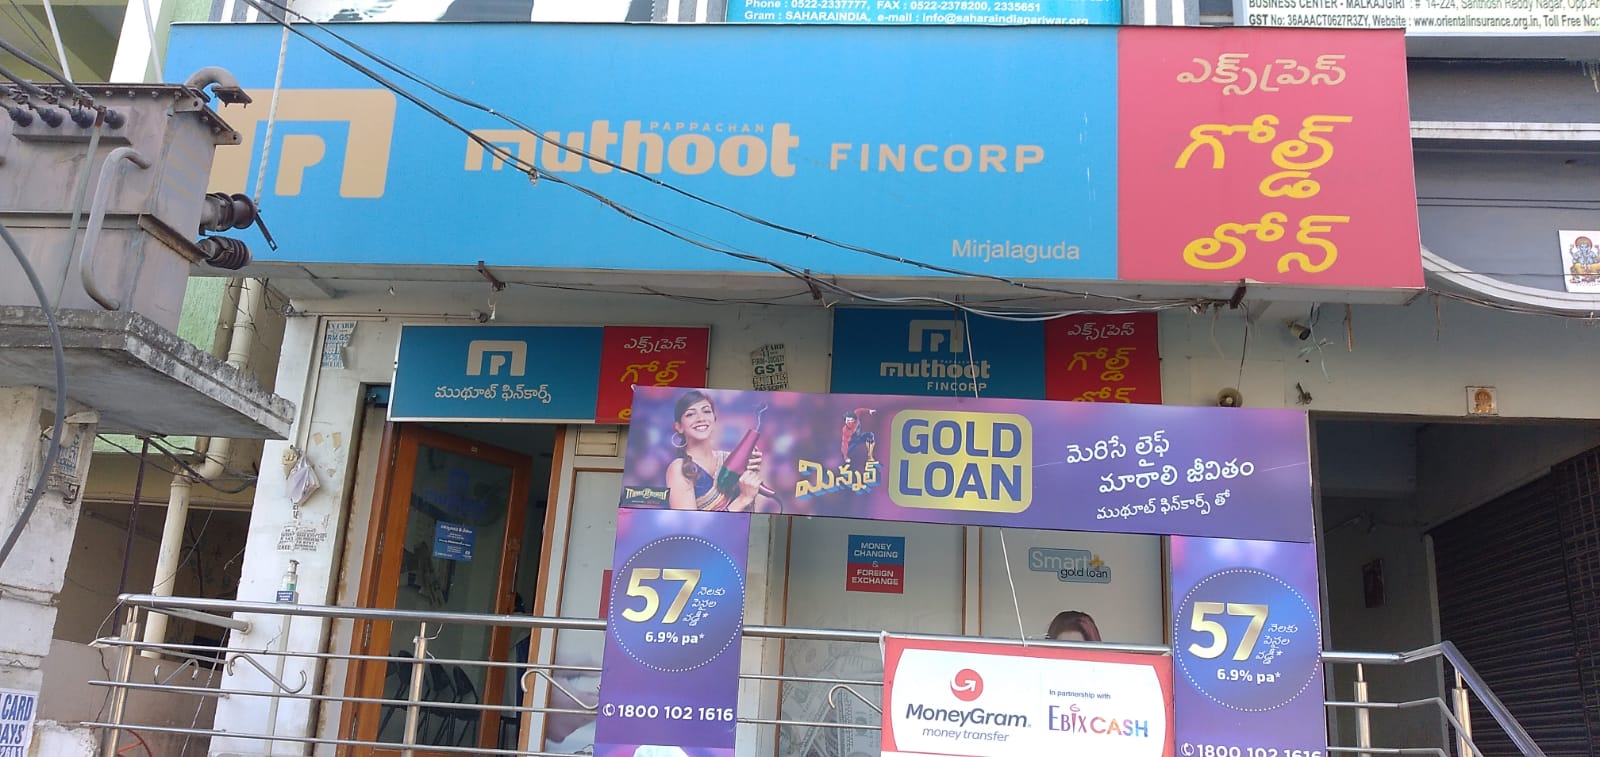 Photos and Videos of Muthoot Fincorp Gold Loan in Mirjalguda, Hyderabad